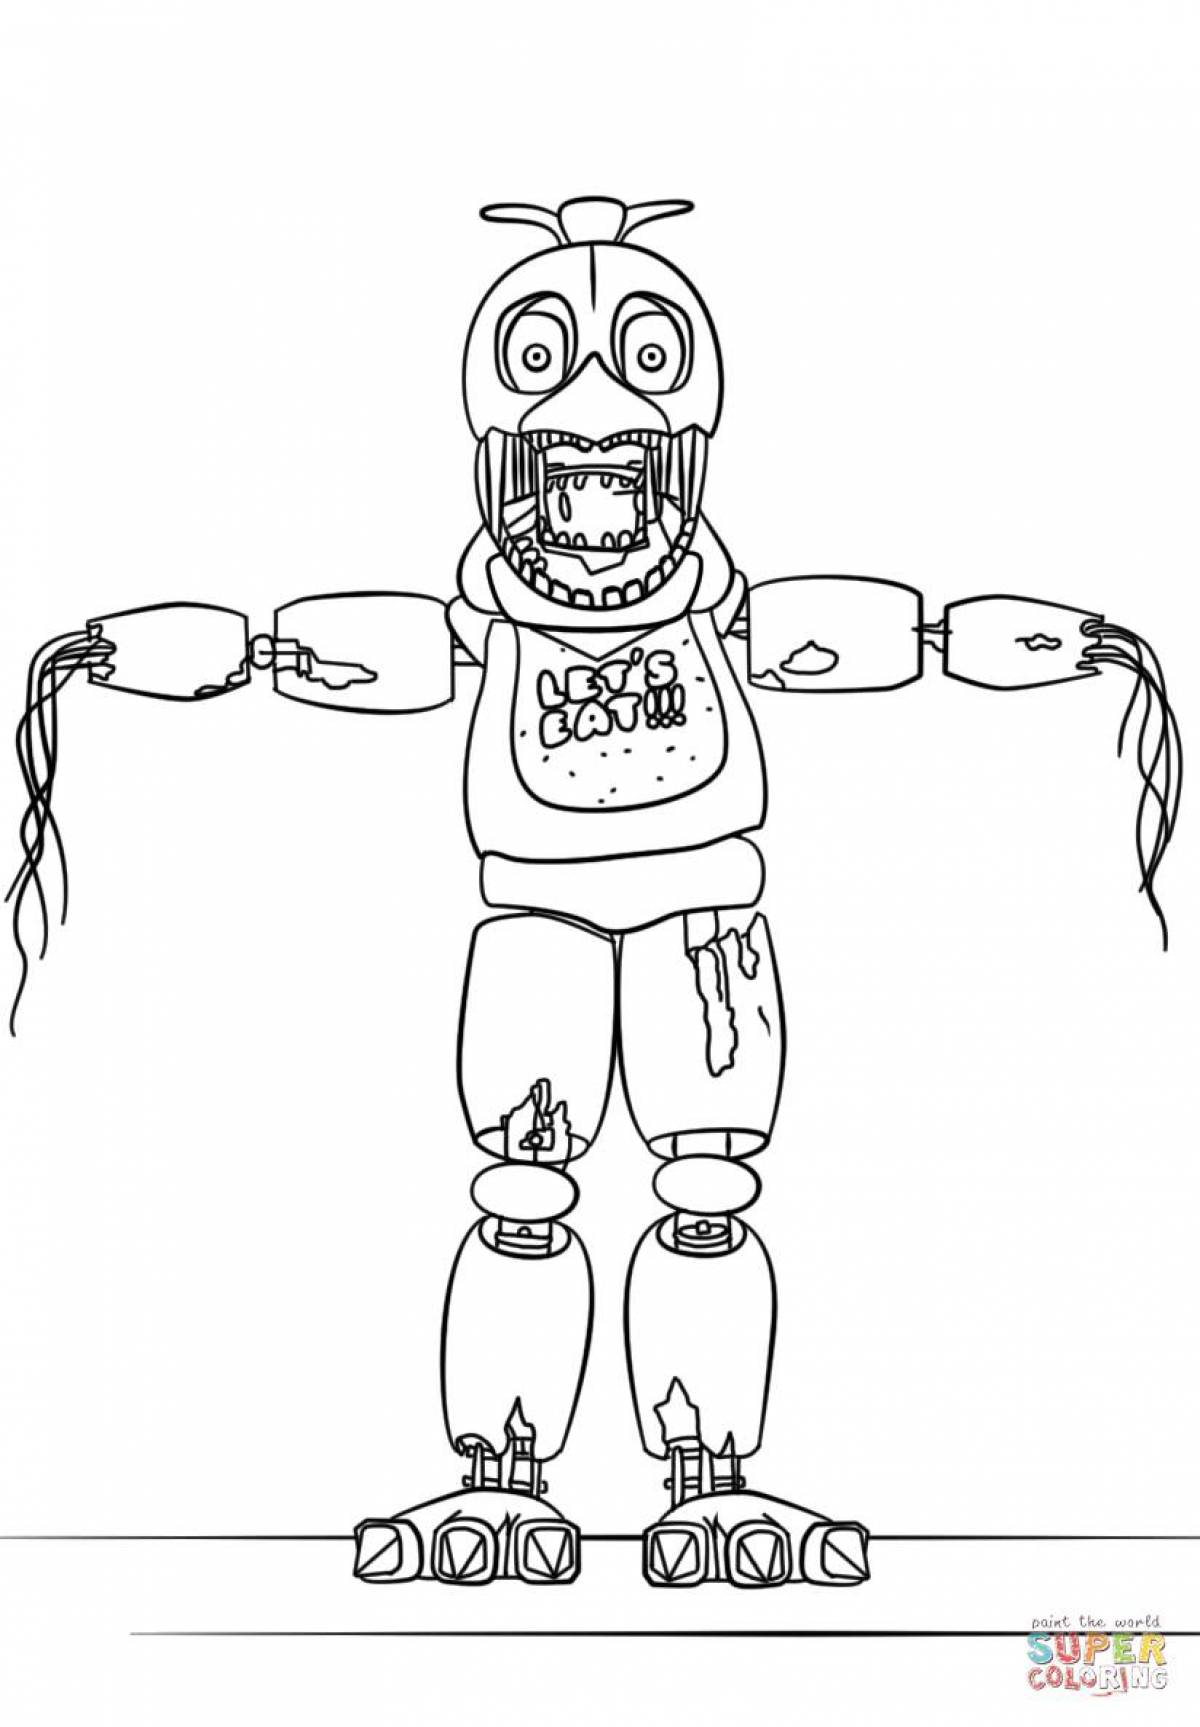 Funny freddy animatronic coloring book